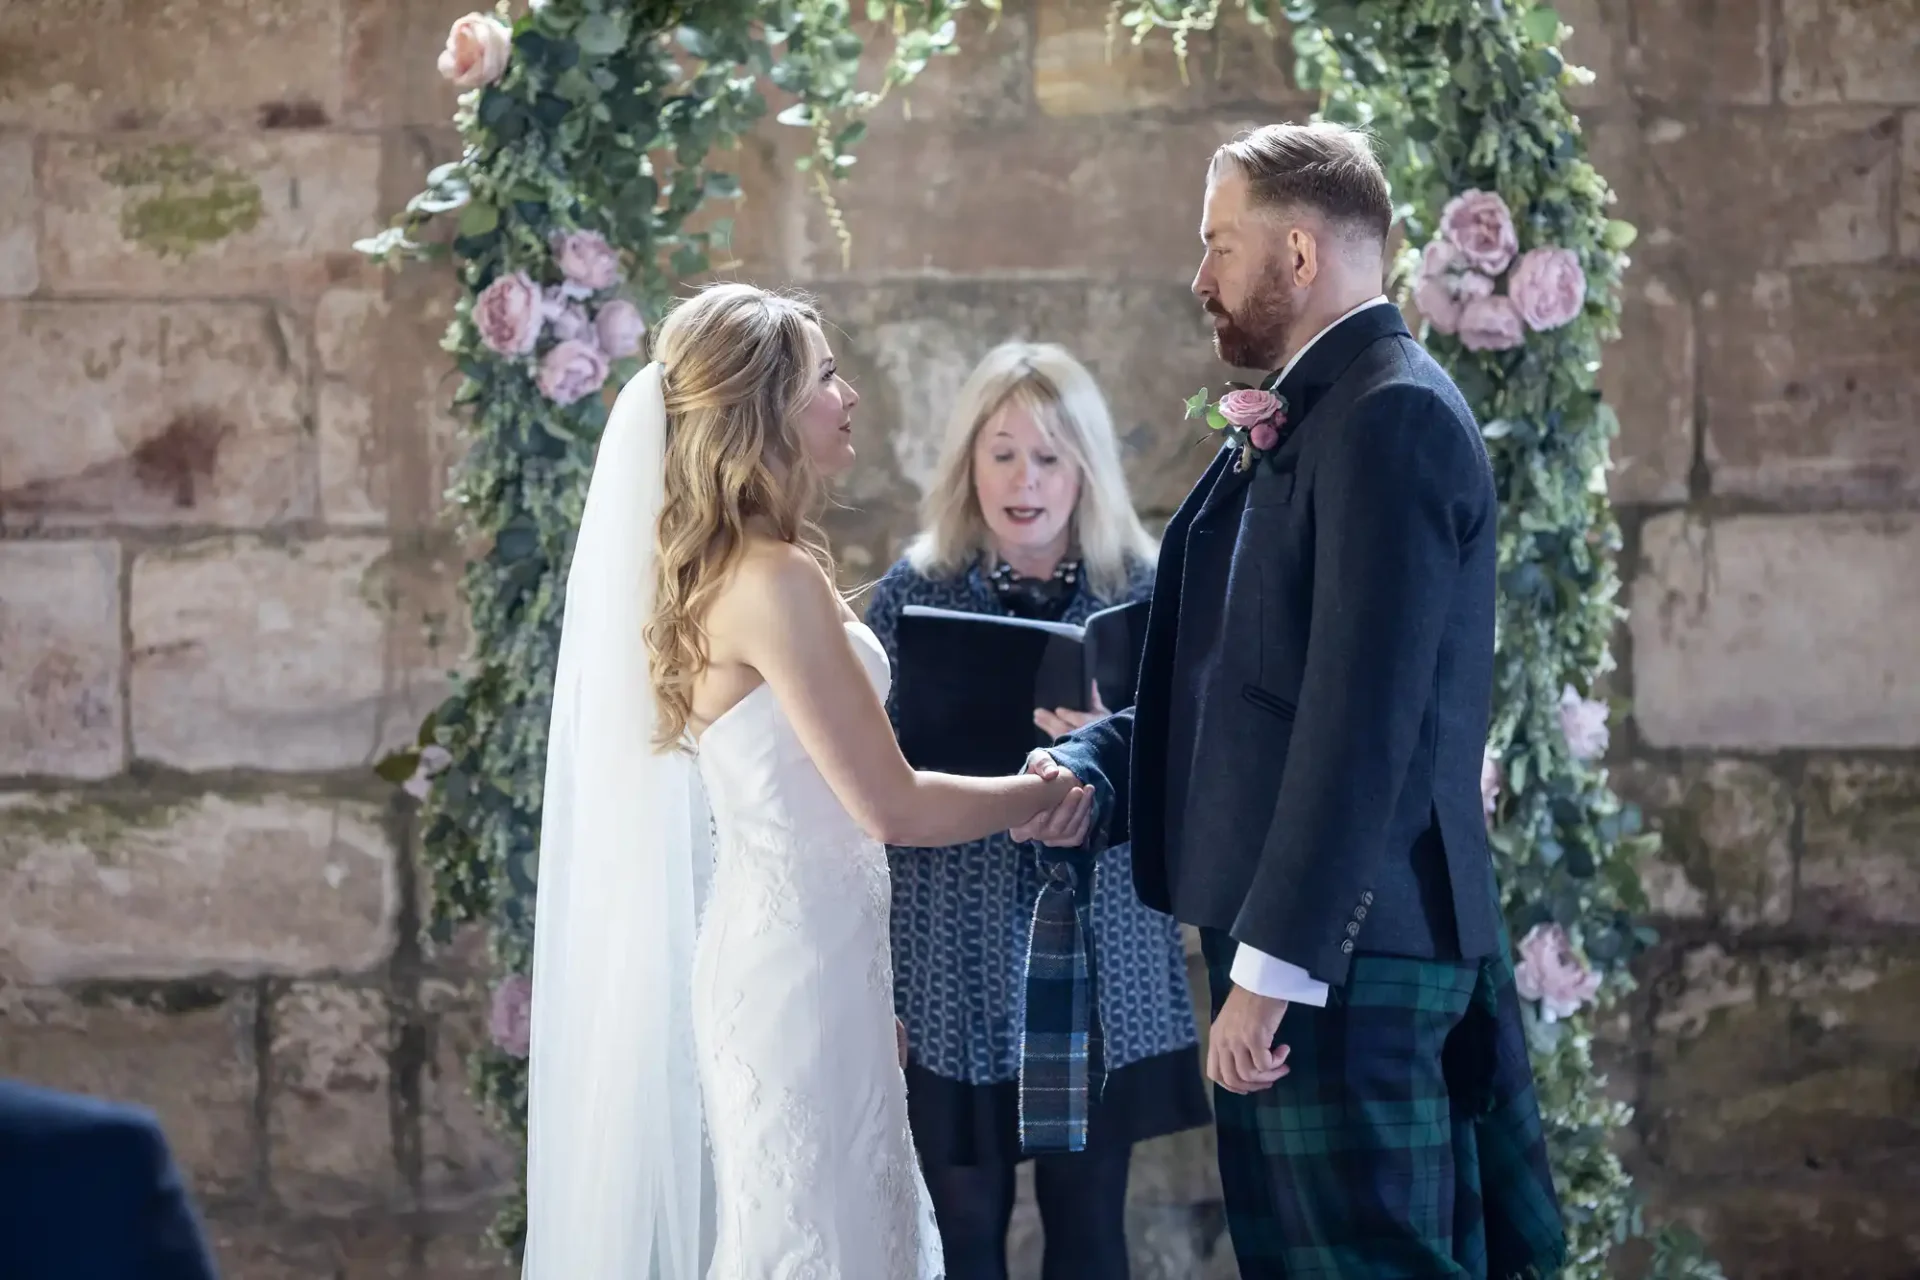 A bride and groom hold hands during their wedding ceremony, officiated by a woman, in a venue decorated with roses and ivy. the groom wears a kilt.